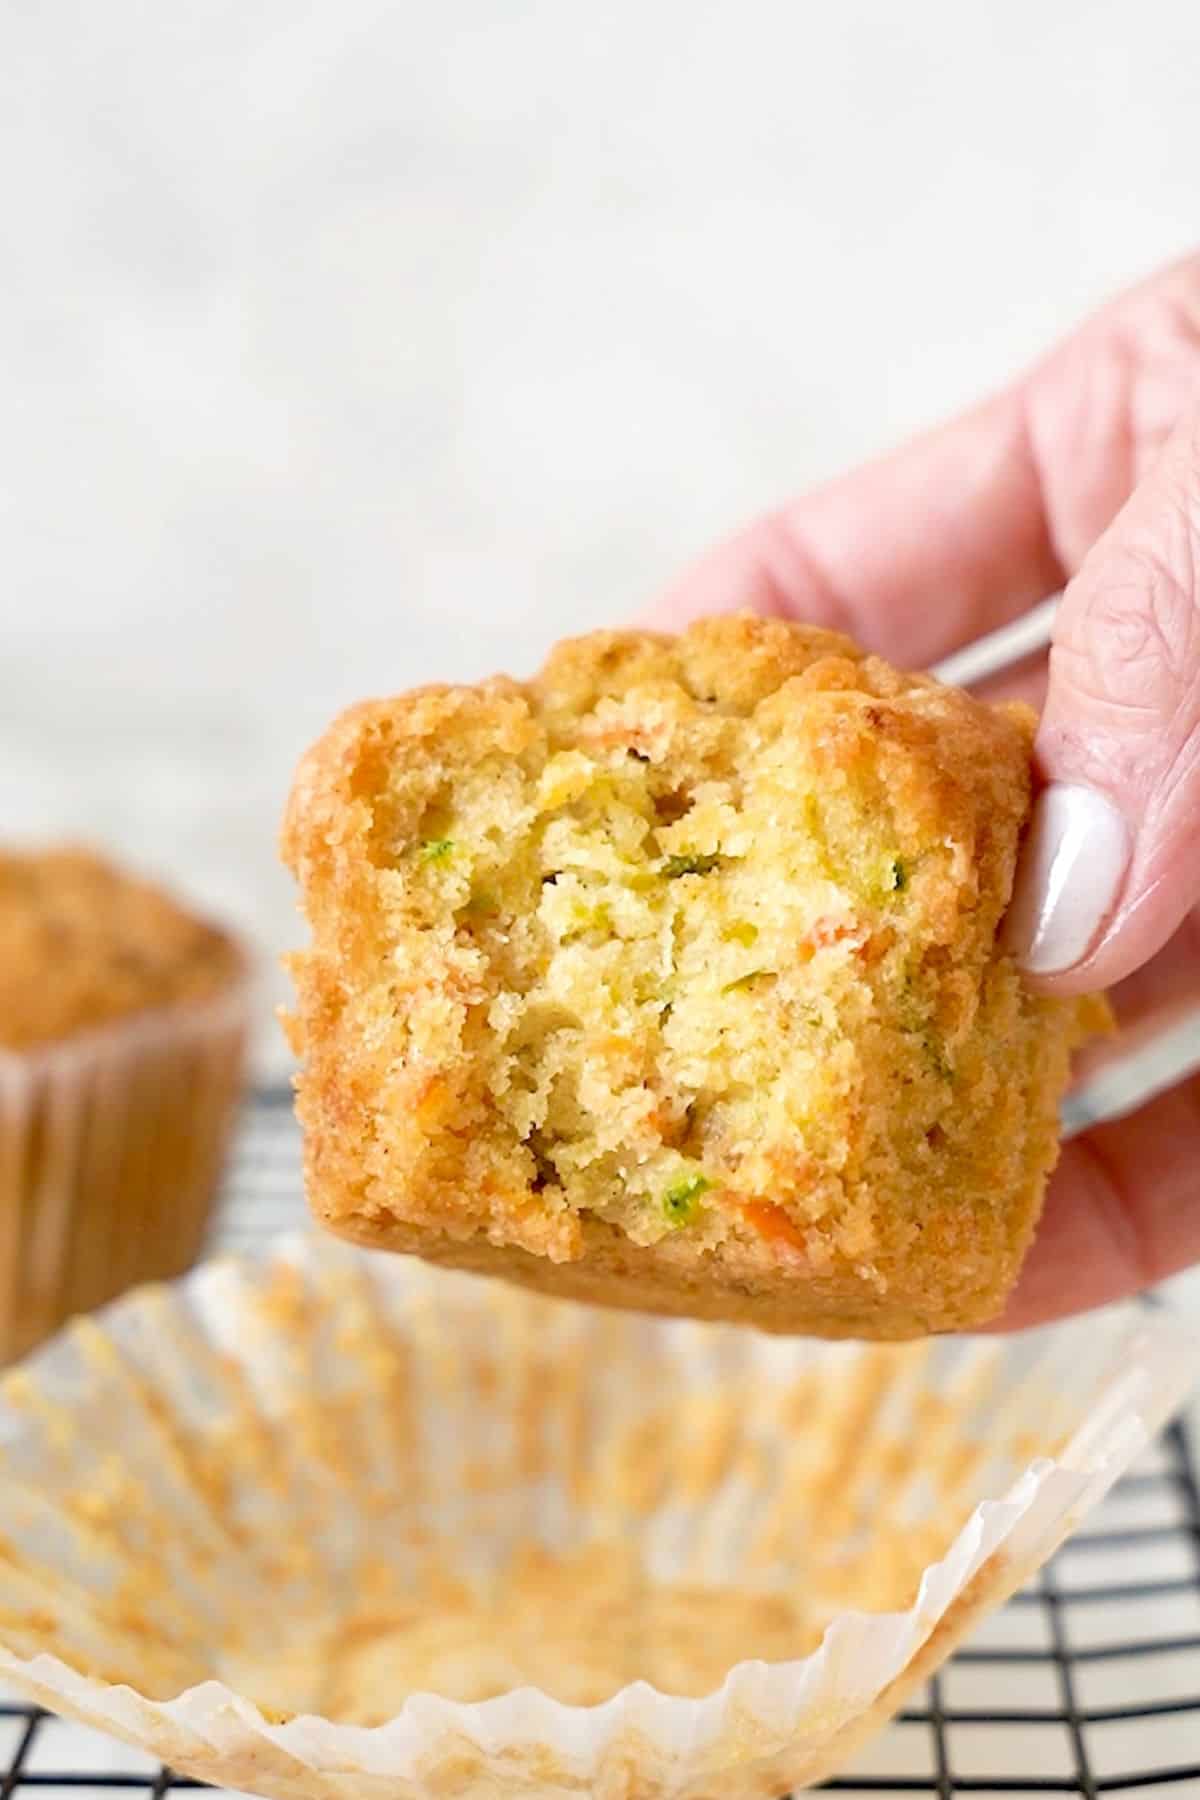 Holding a bitten zucchini carrot muffin over an opened paper liner. Greyish background.